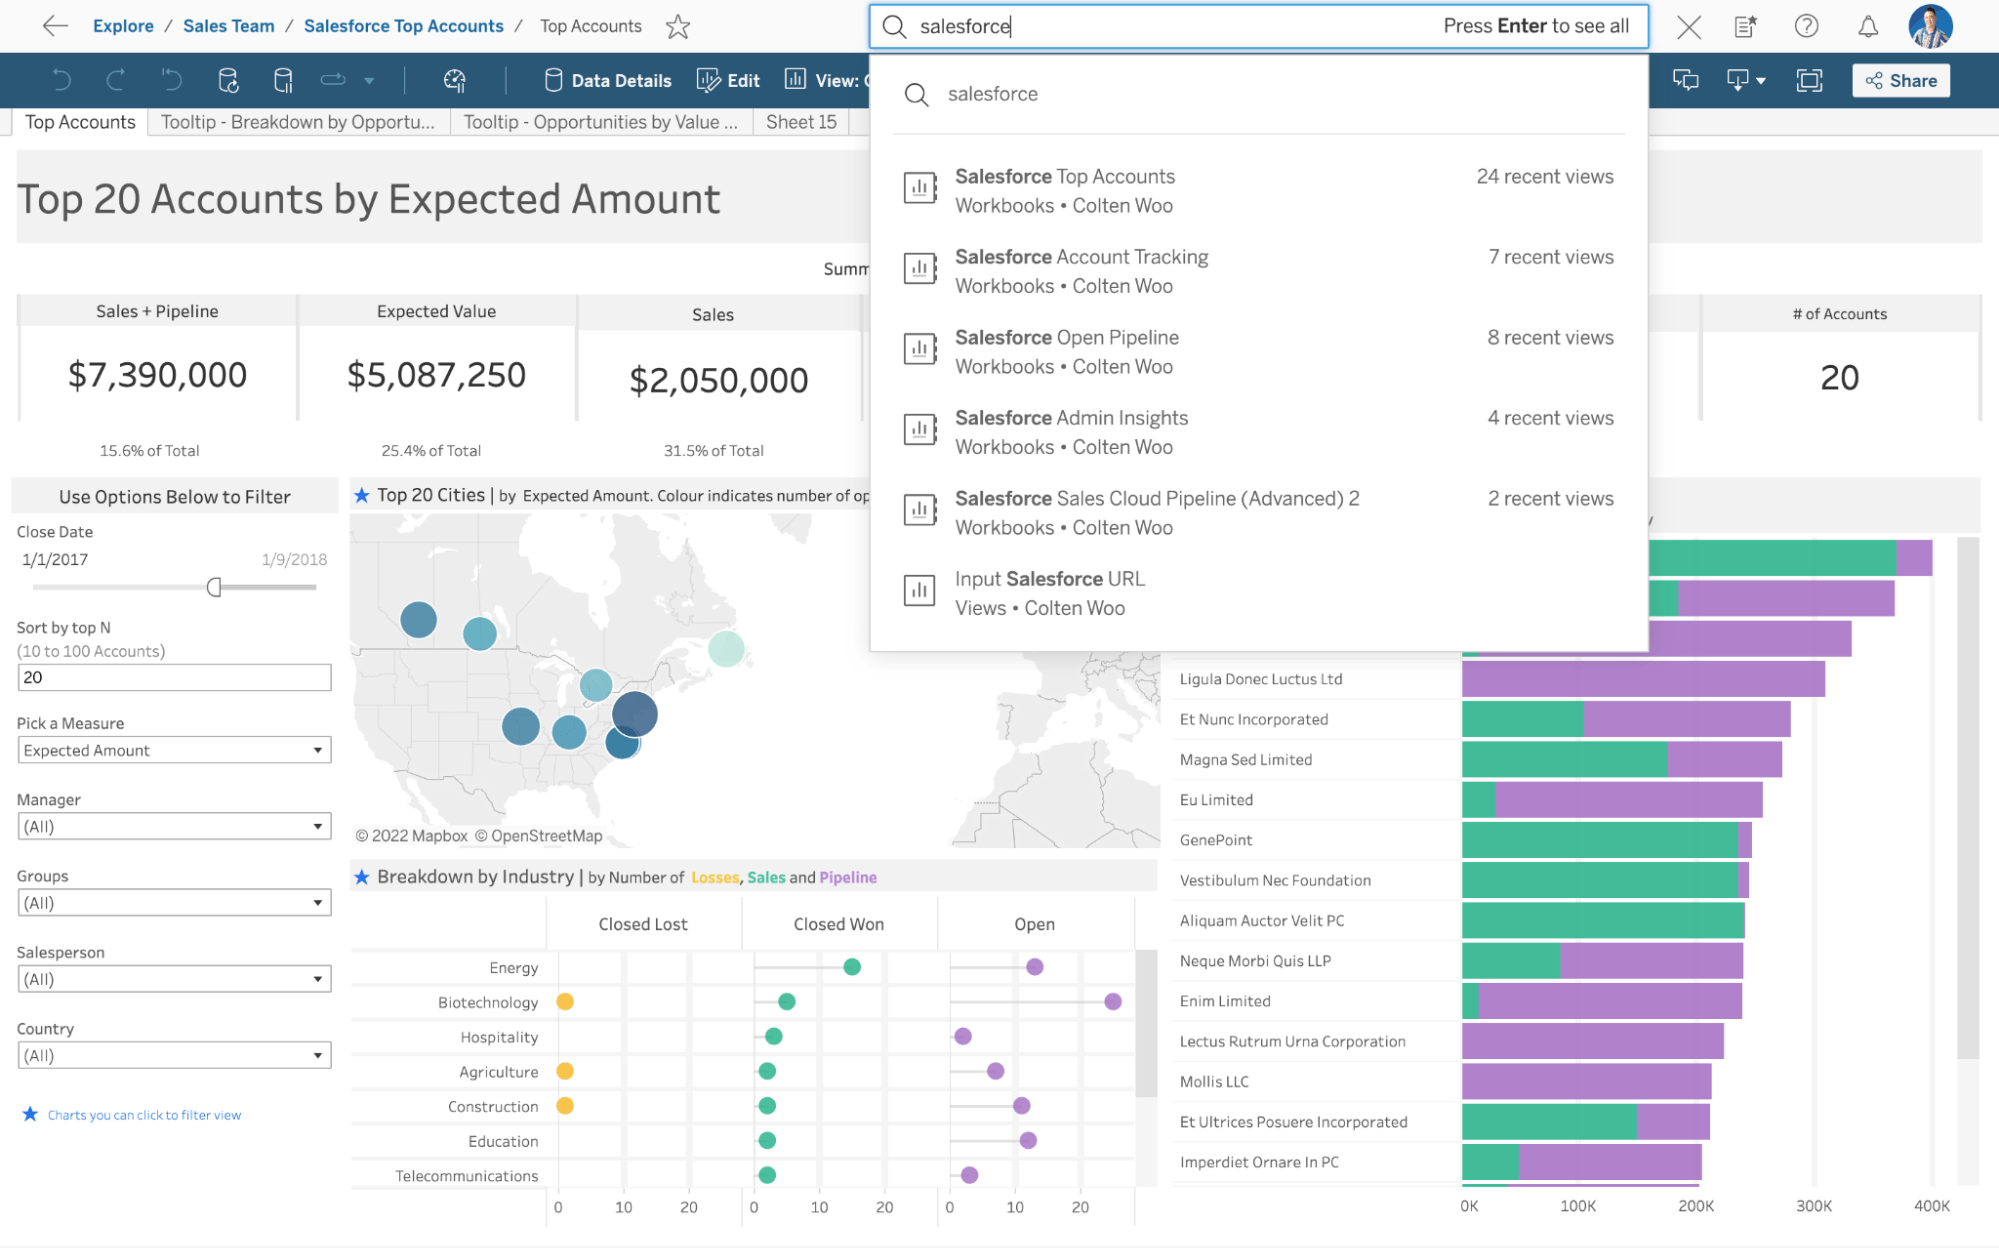 Tableau Cloud interface showing the Quick Search box along the top, displaying past searches and suggested content